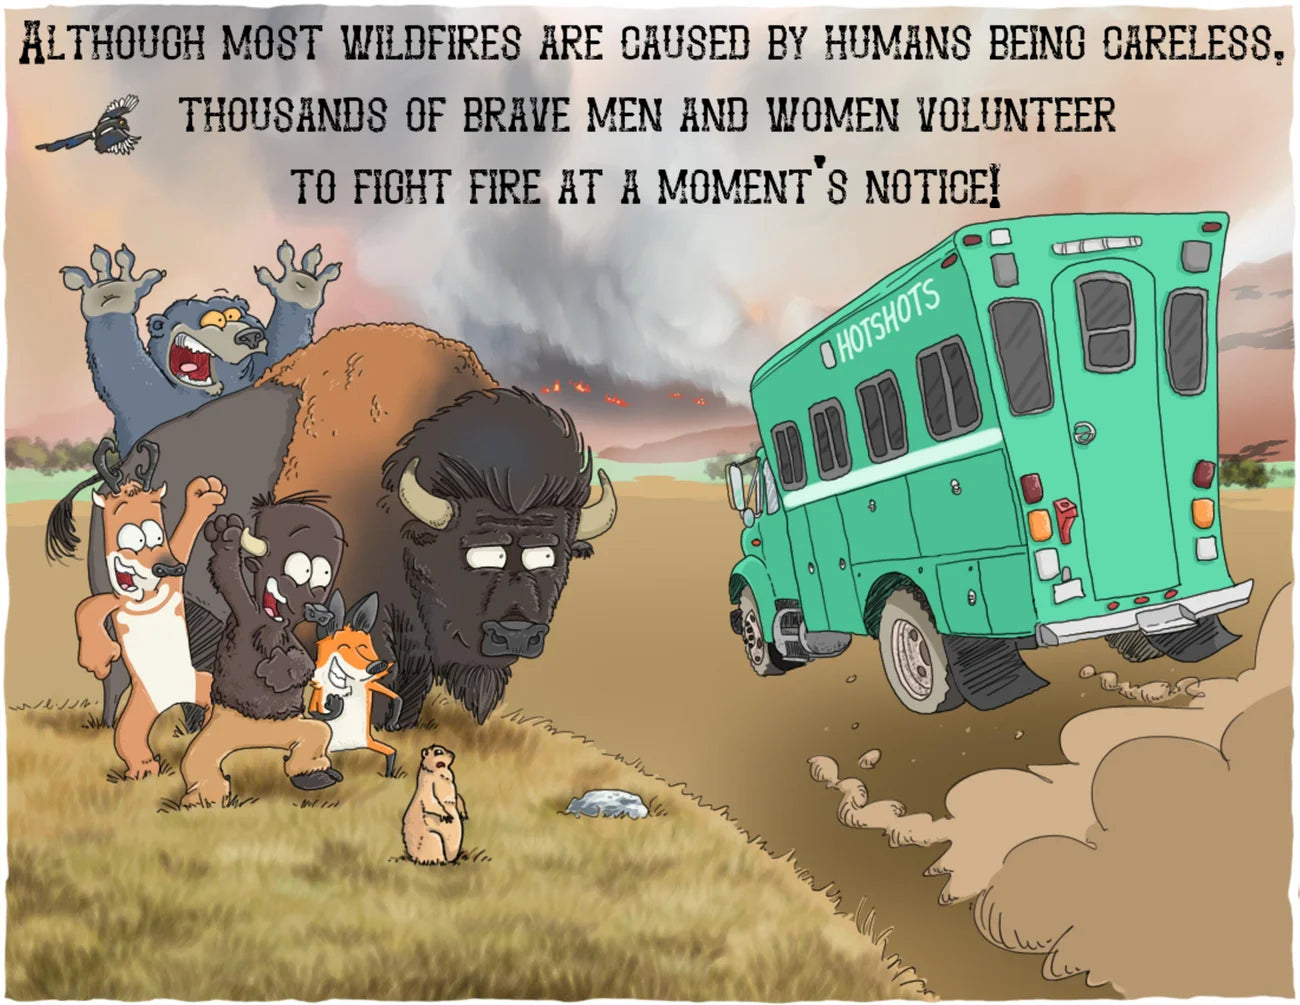 Ace the Bison Book 2 Wildfire!